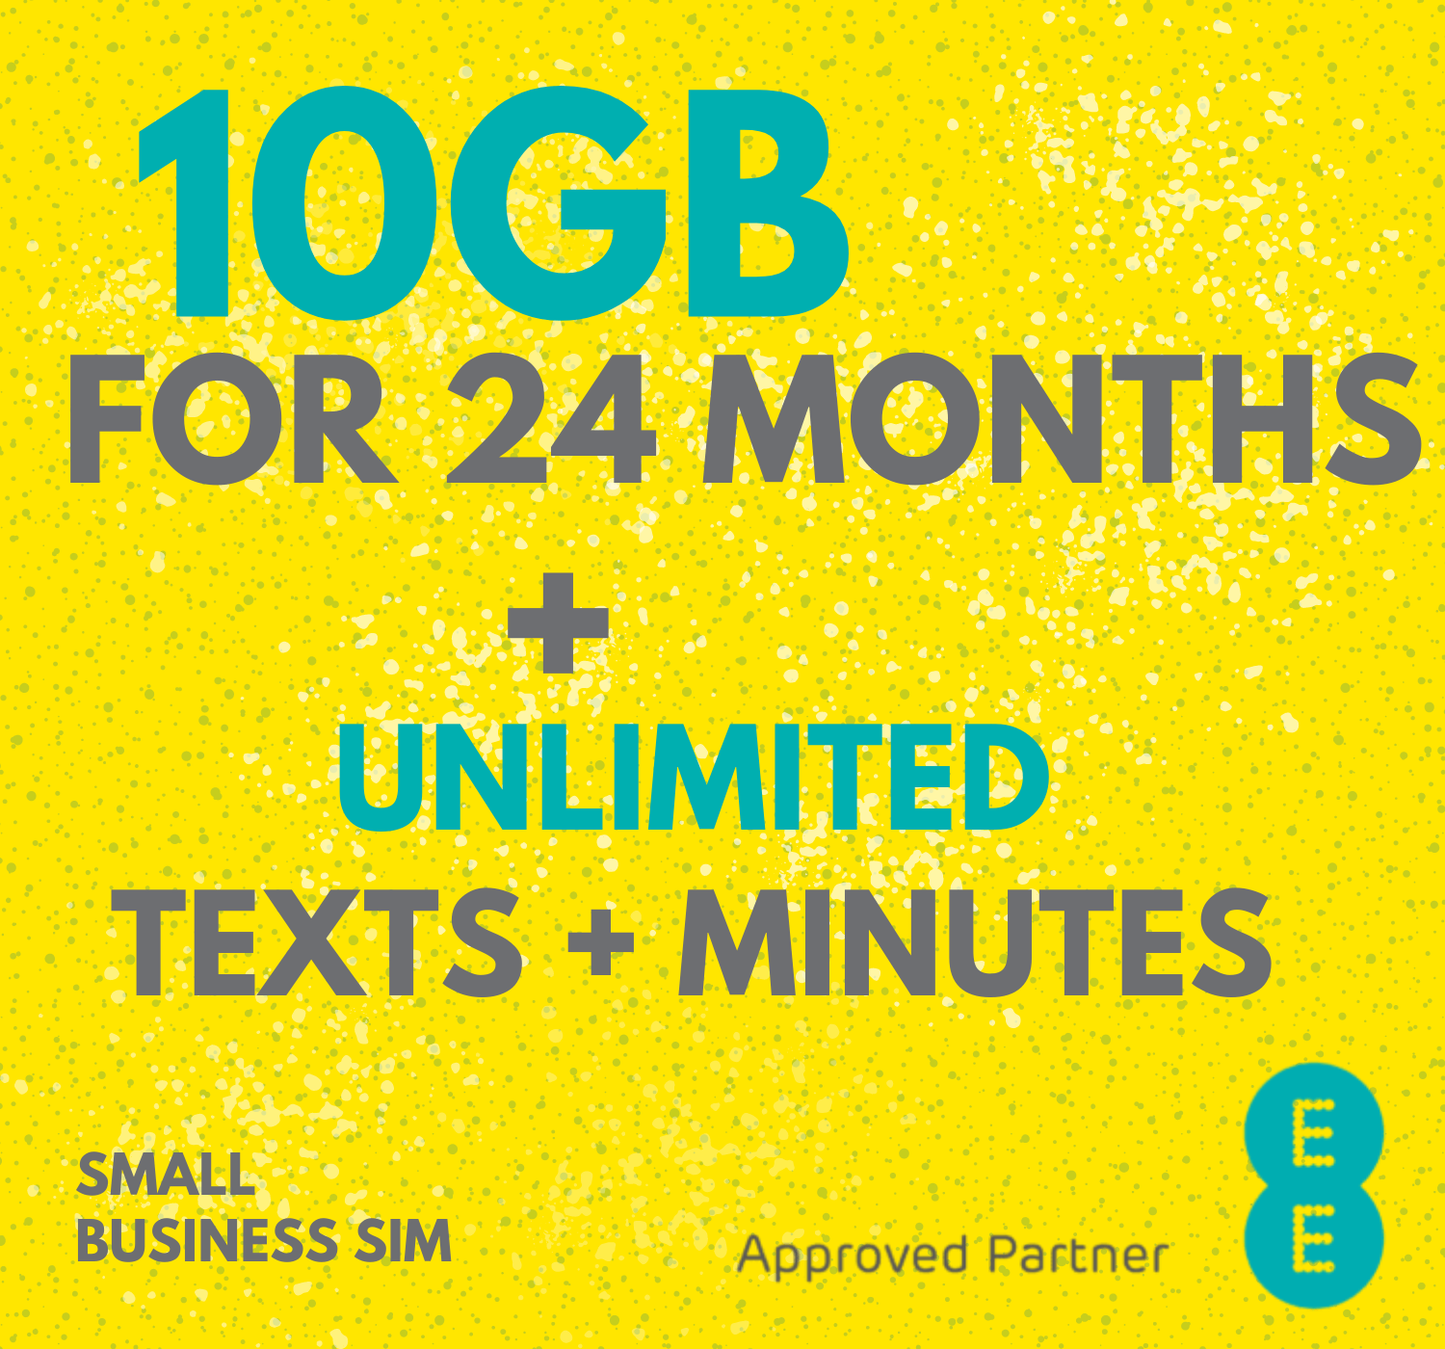 EE Business SIM £15pm 10GB Data and Unlimited Mins & Texts - 24 month